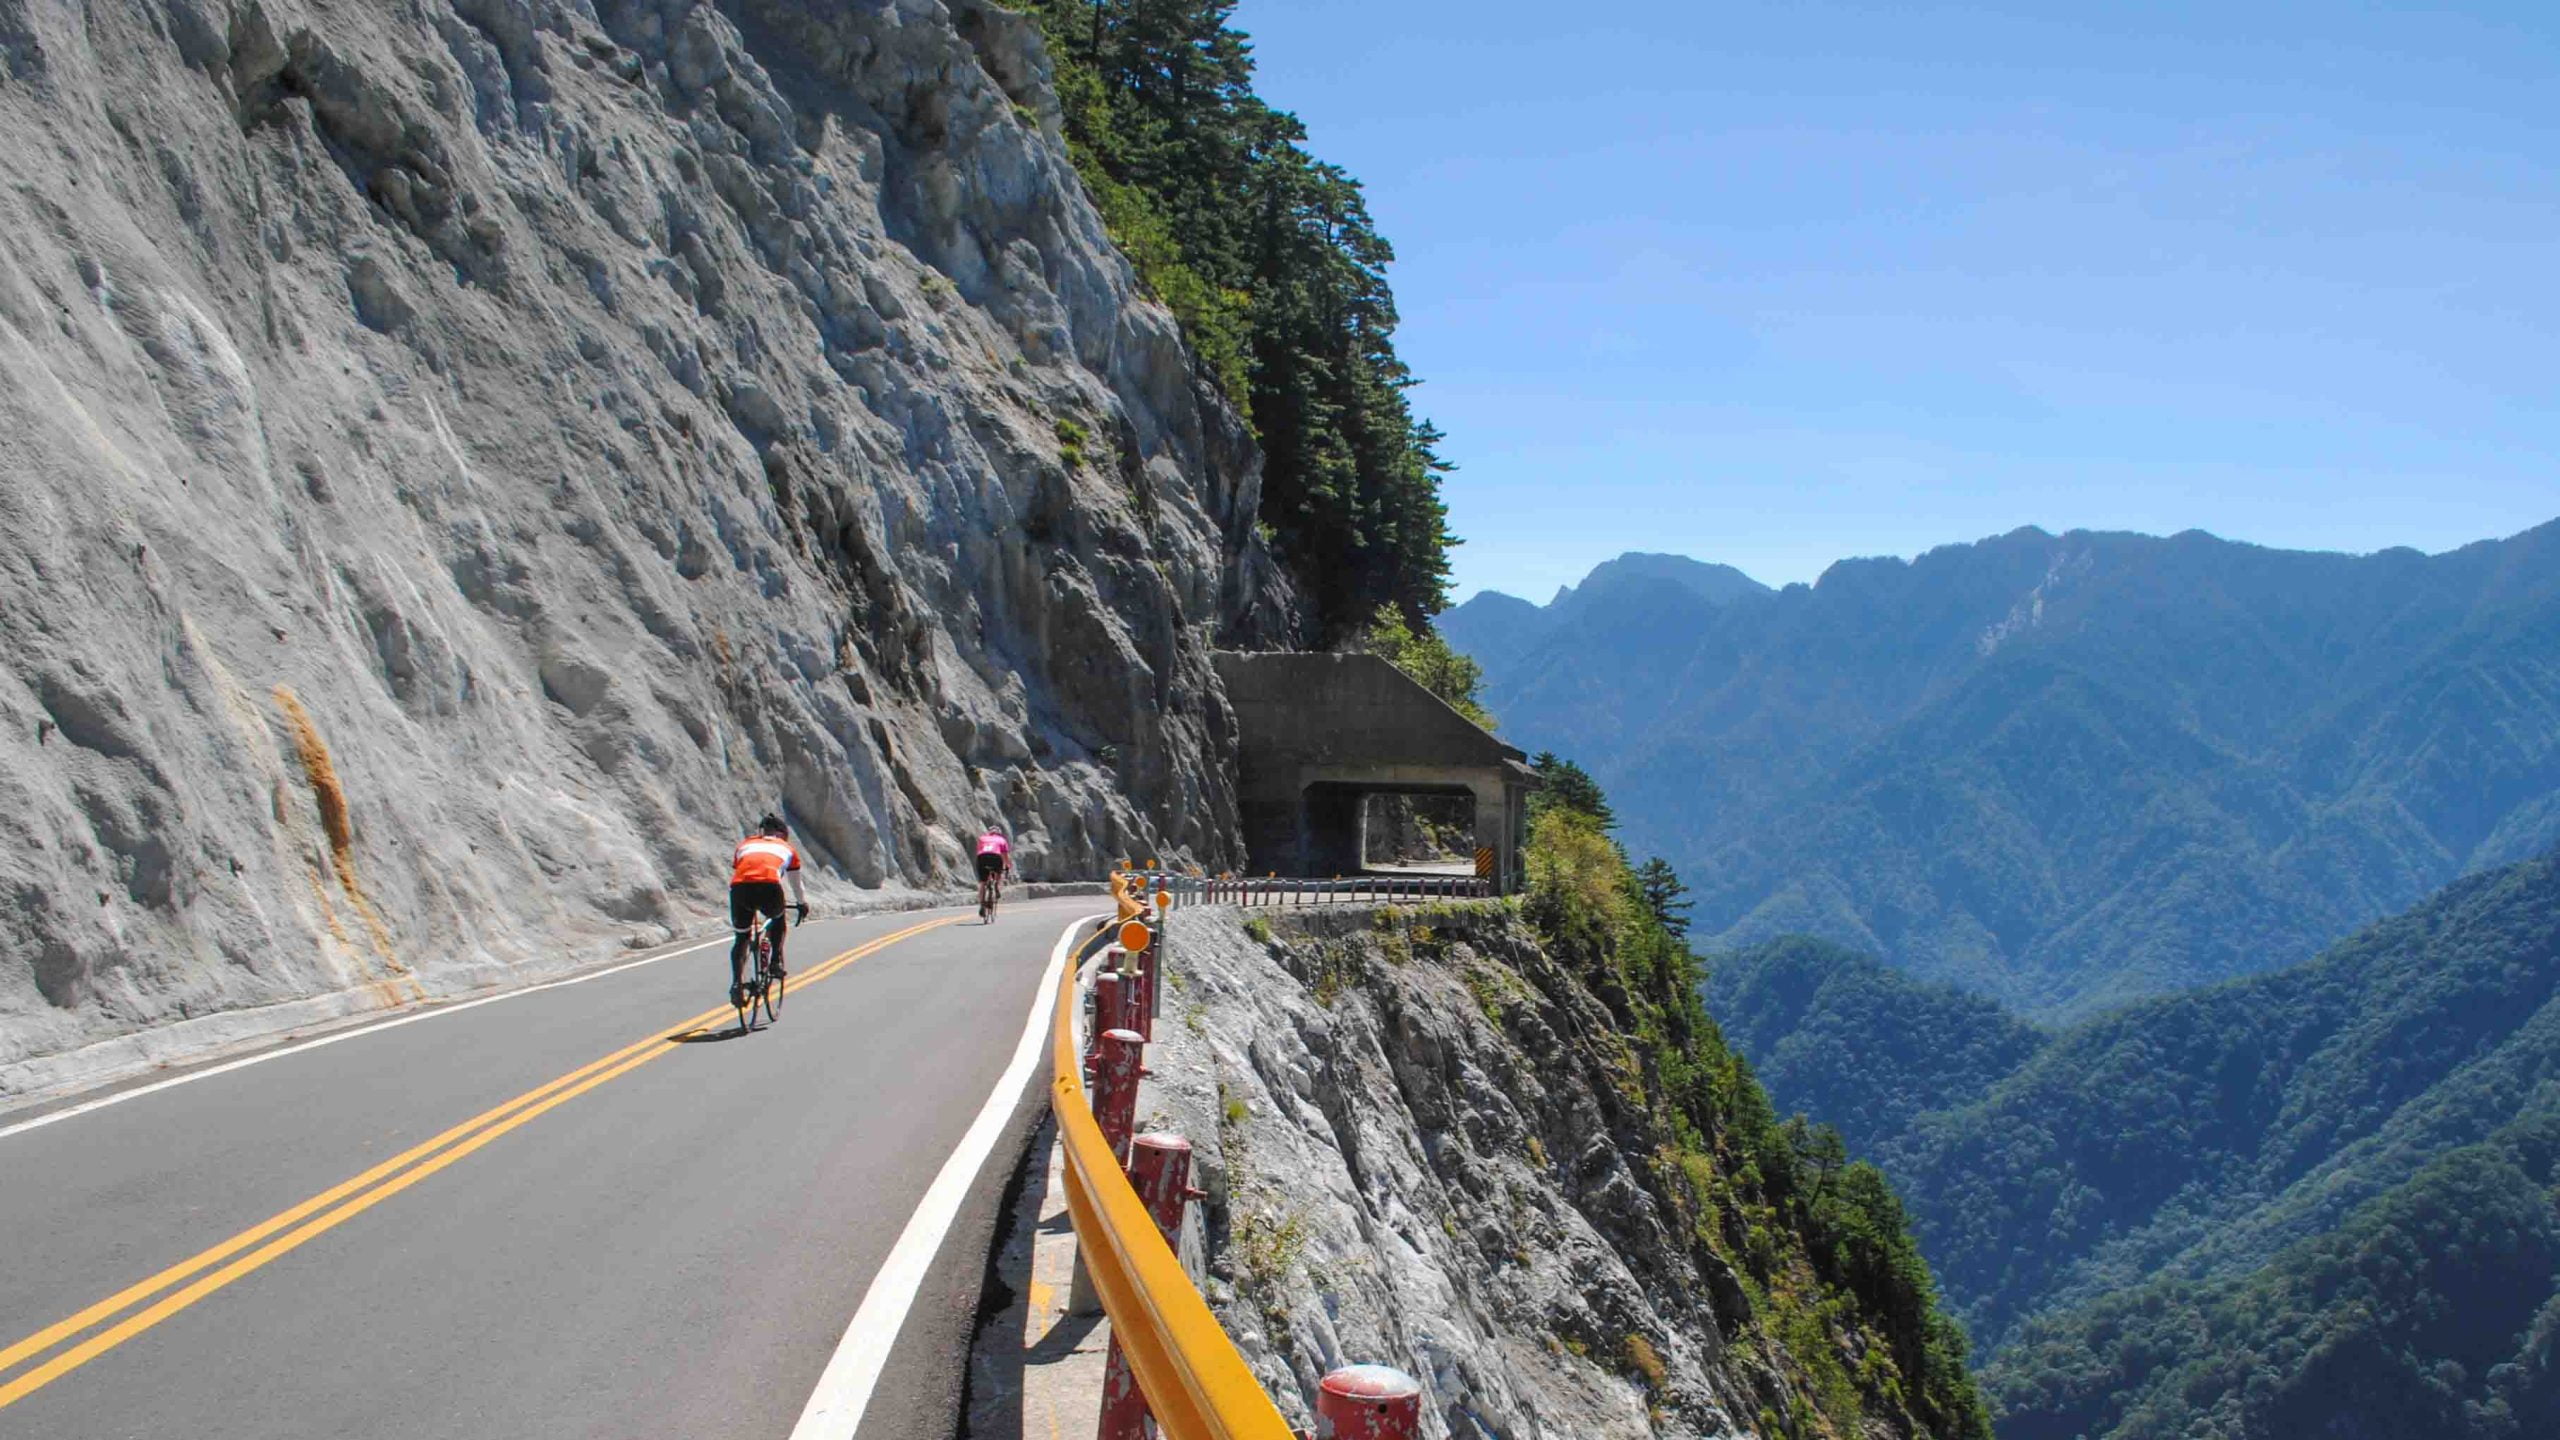 Cyclists on mountain road in Taiwan